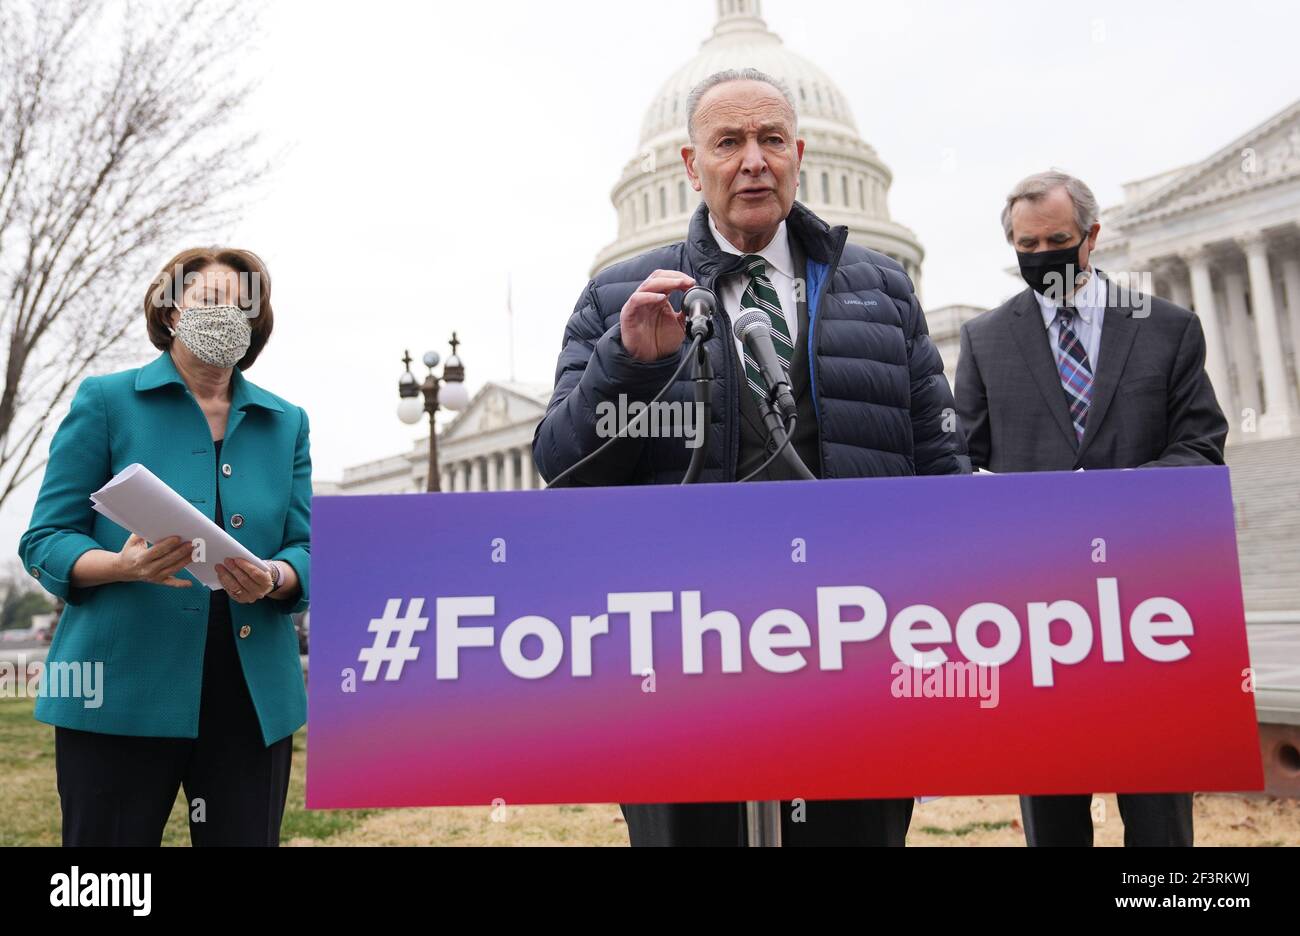 Washington, United States. 17th Mar, 2021. Senate Majority Leader Chuck Schumer, D-N.Y., (C) speaks alogonsdie Sen. Amy Klobuchar, D-MN, and Sen. Jeff Merkley, D-OR, at a news conference introducing S.1., the For the People Act in Washington, DC on Wednesday, March 17, 2021. The Act aims to expand voting rights, change campaign finance laws to reduce the influence of money in politics, limit partisan gerrymandering, and create new ethics rules for federal officeholders. Photo by Kevin Dietsch/UPI Credit: UPI/Alamy Live News Stock Photo